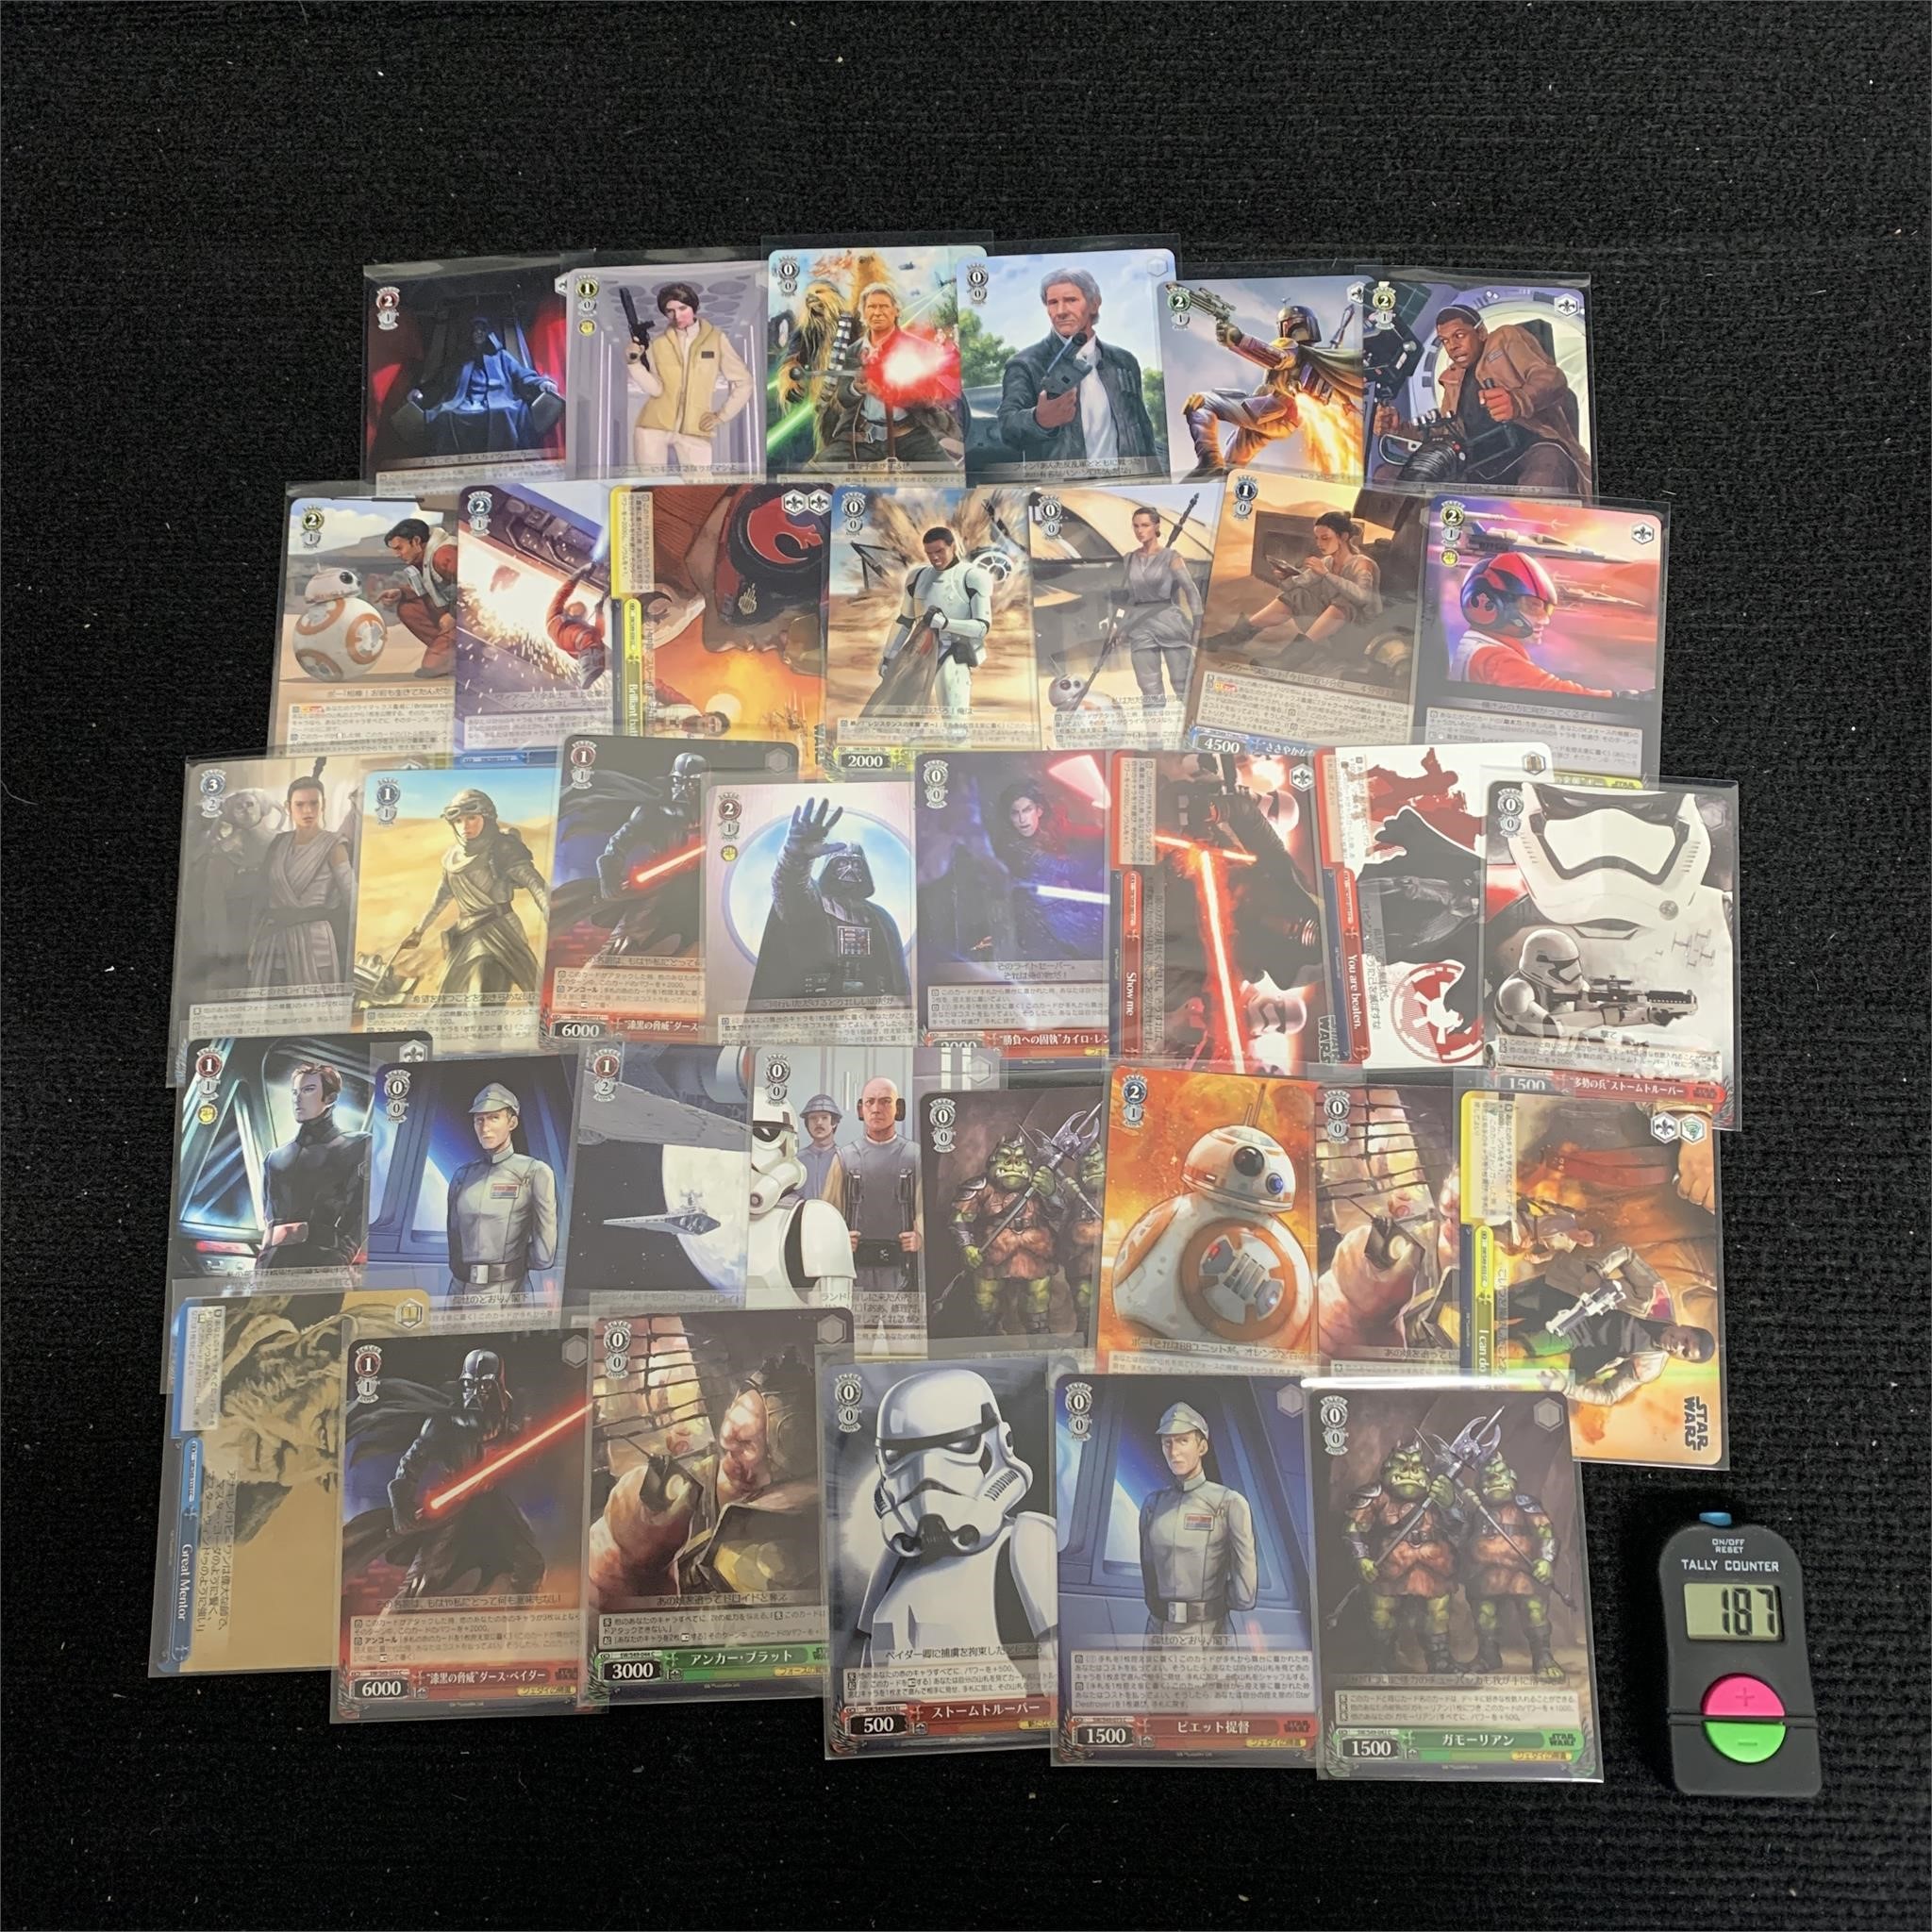 Star Wars, Disney, Sci-fi Collectibles Auction